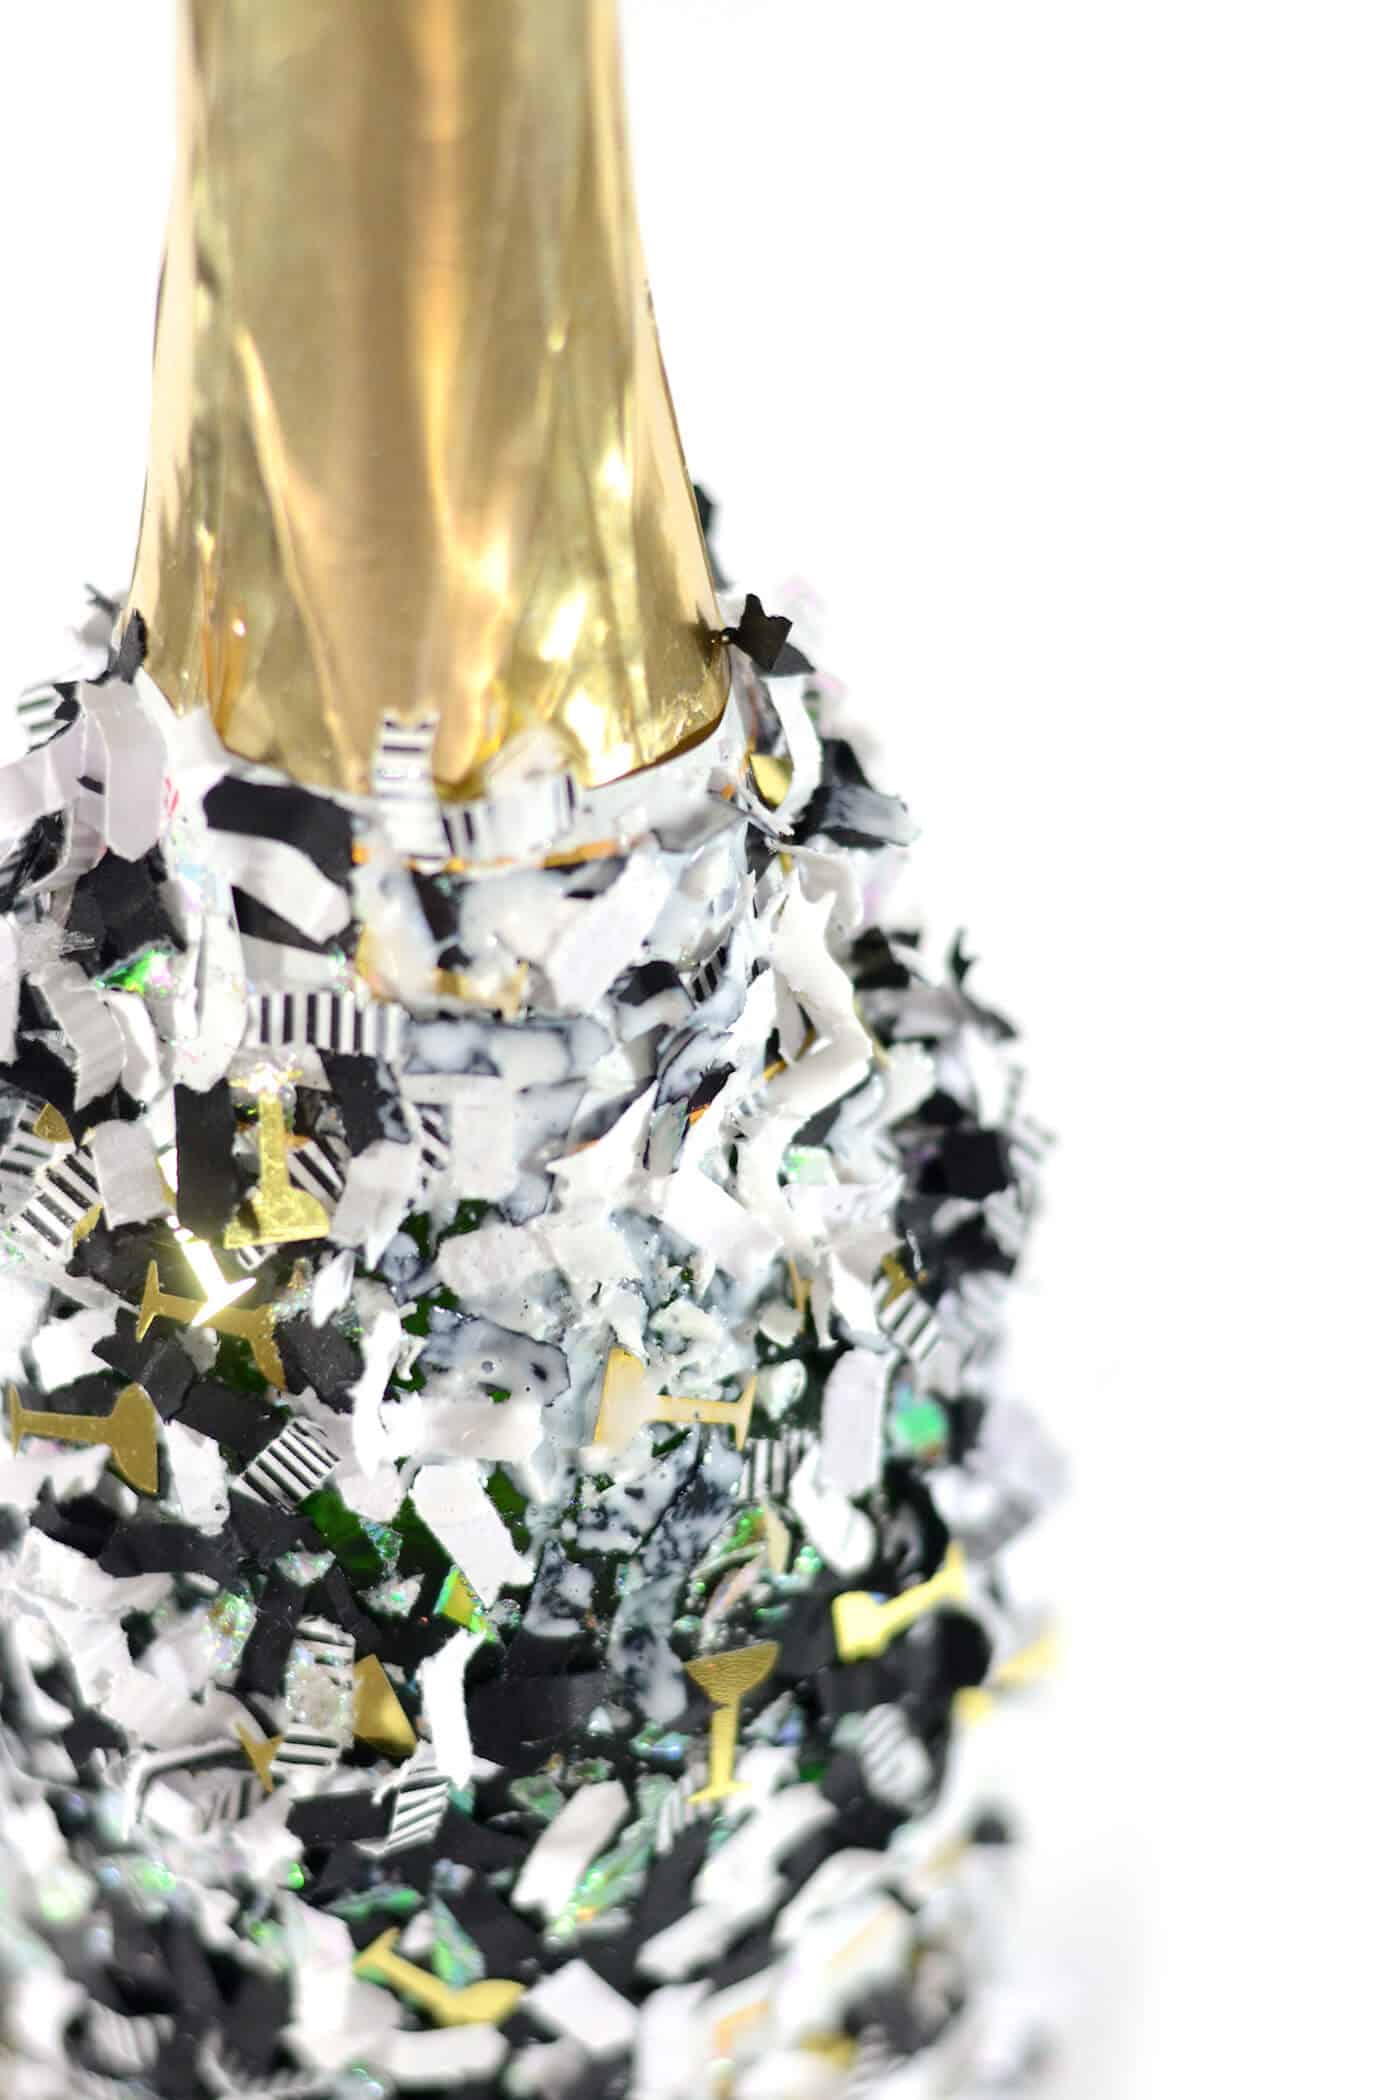 Confetti sprinkled on a champagne bottle